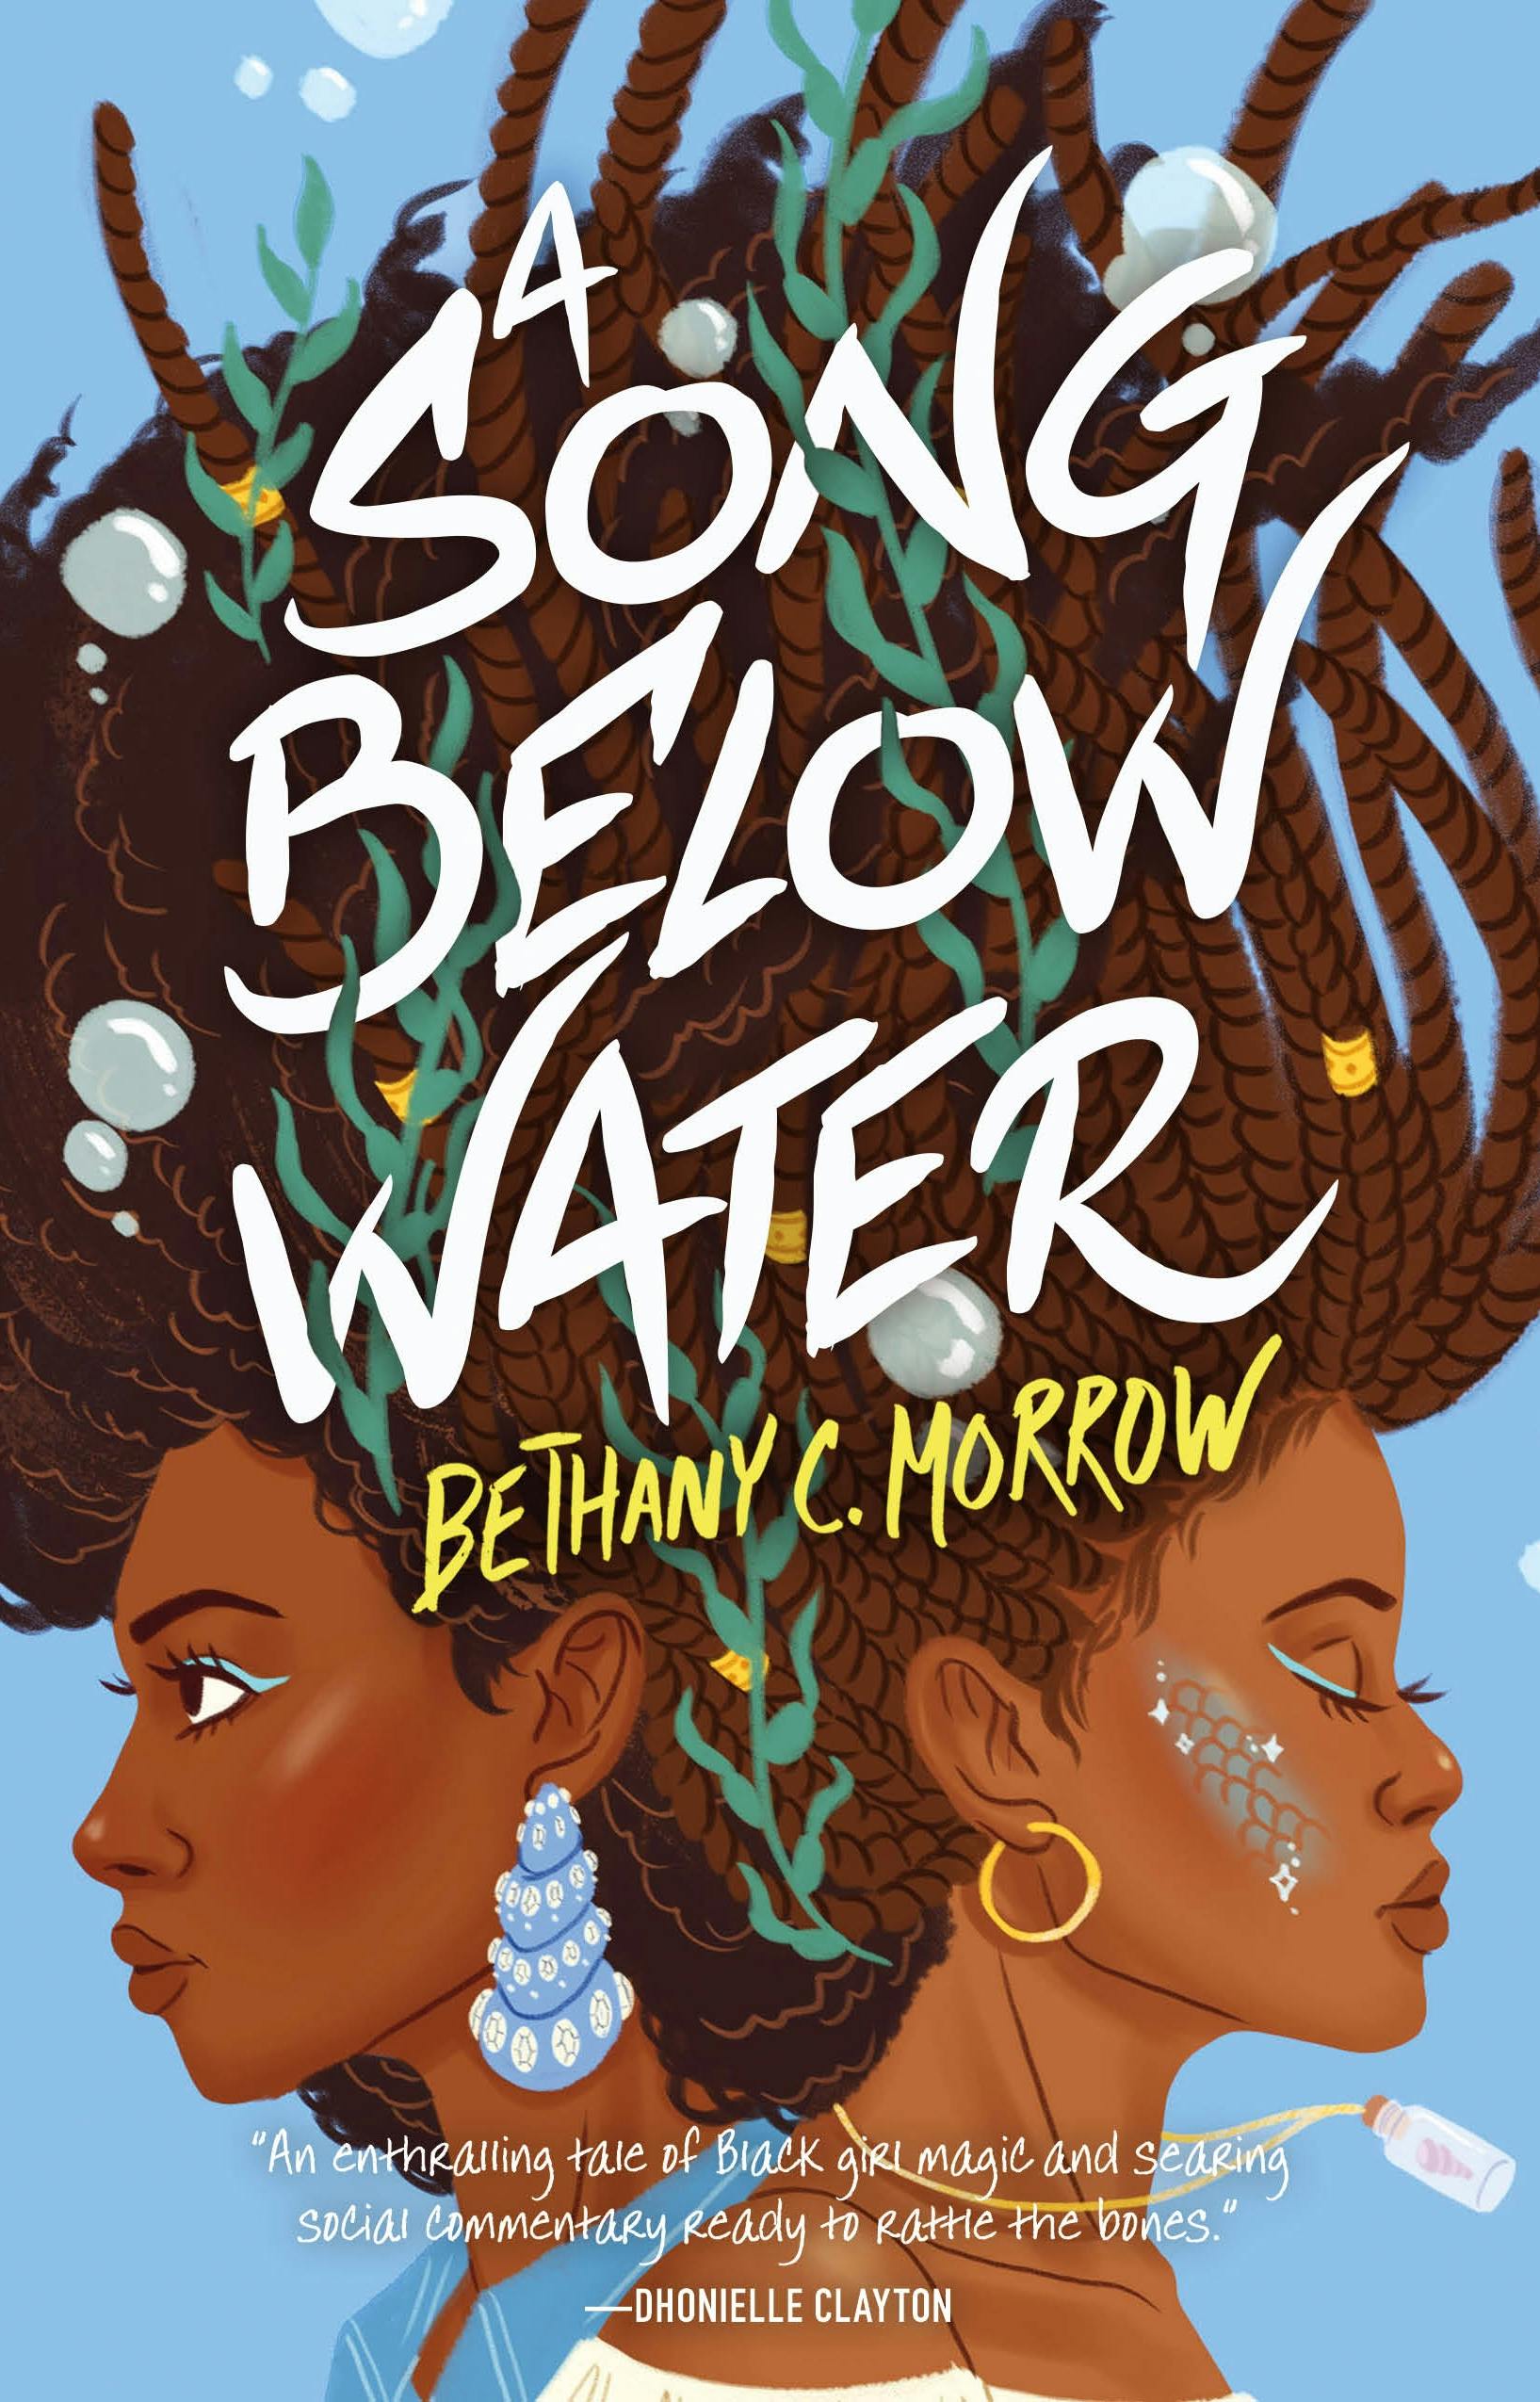 Cover for the book titled as: A Song Below Water